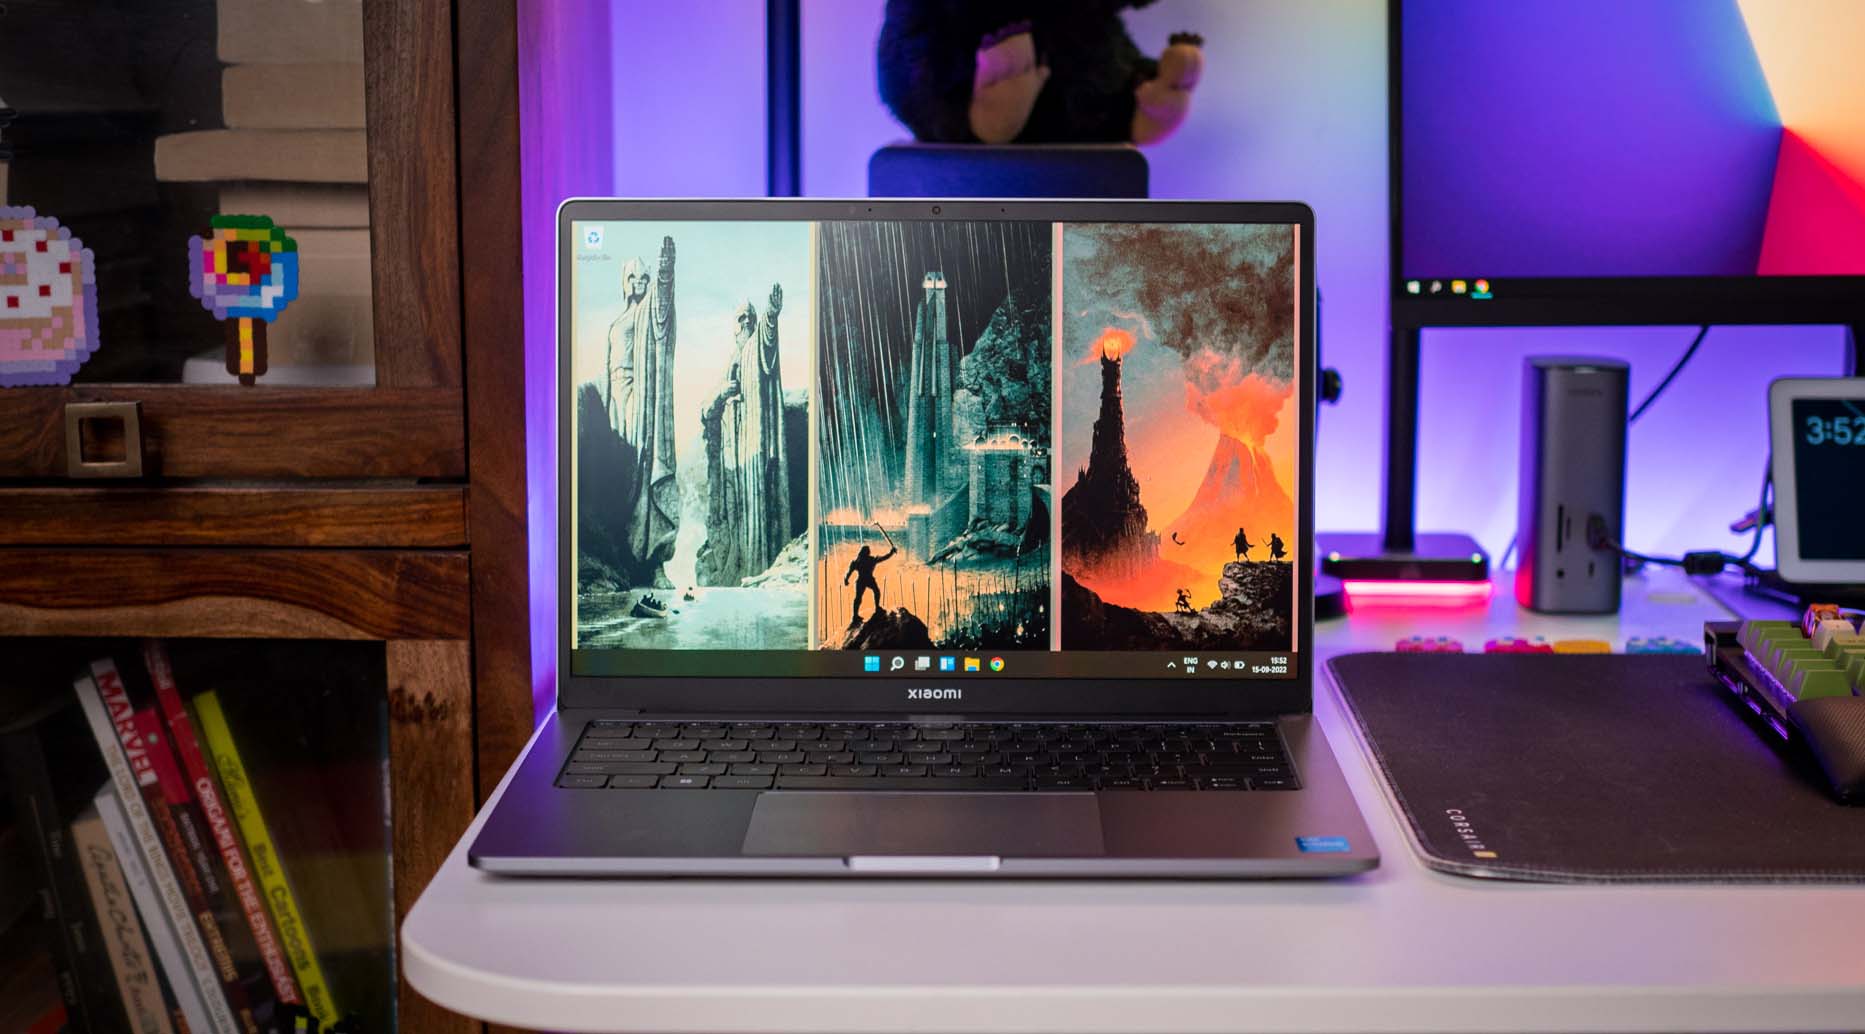 Xiaomi NoteBook Pro 120, NoteBook Pro 120G launched in India: All